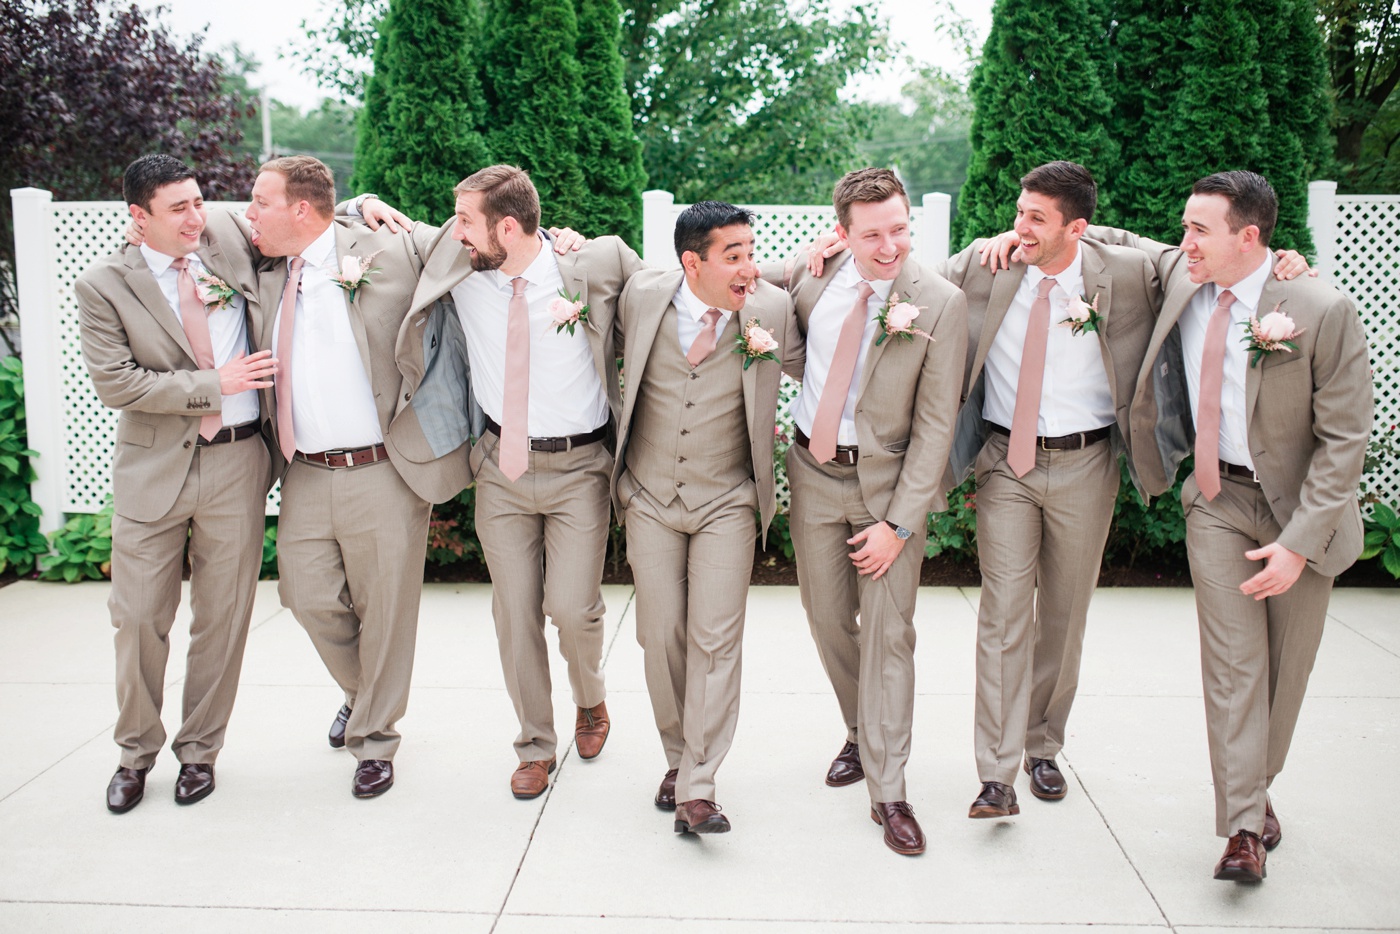 JC Penney Tan Groomsmen Suits photo | Alison Dunn Photography